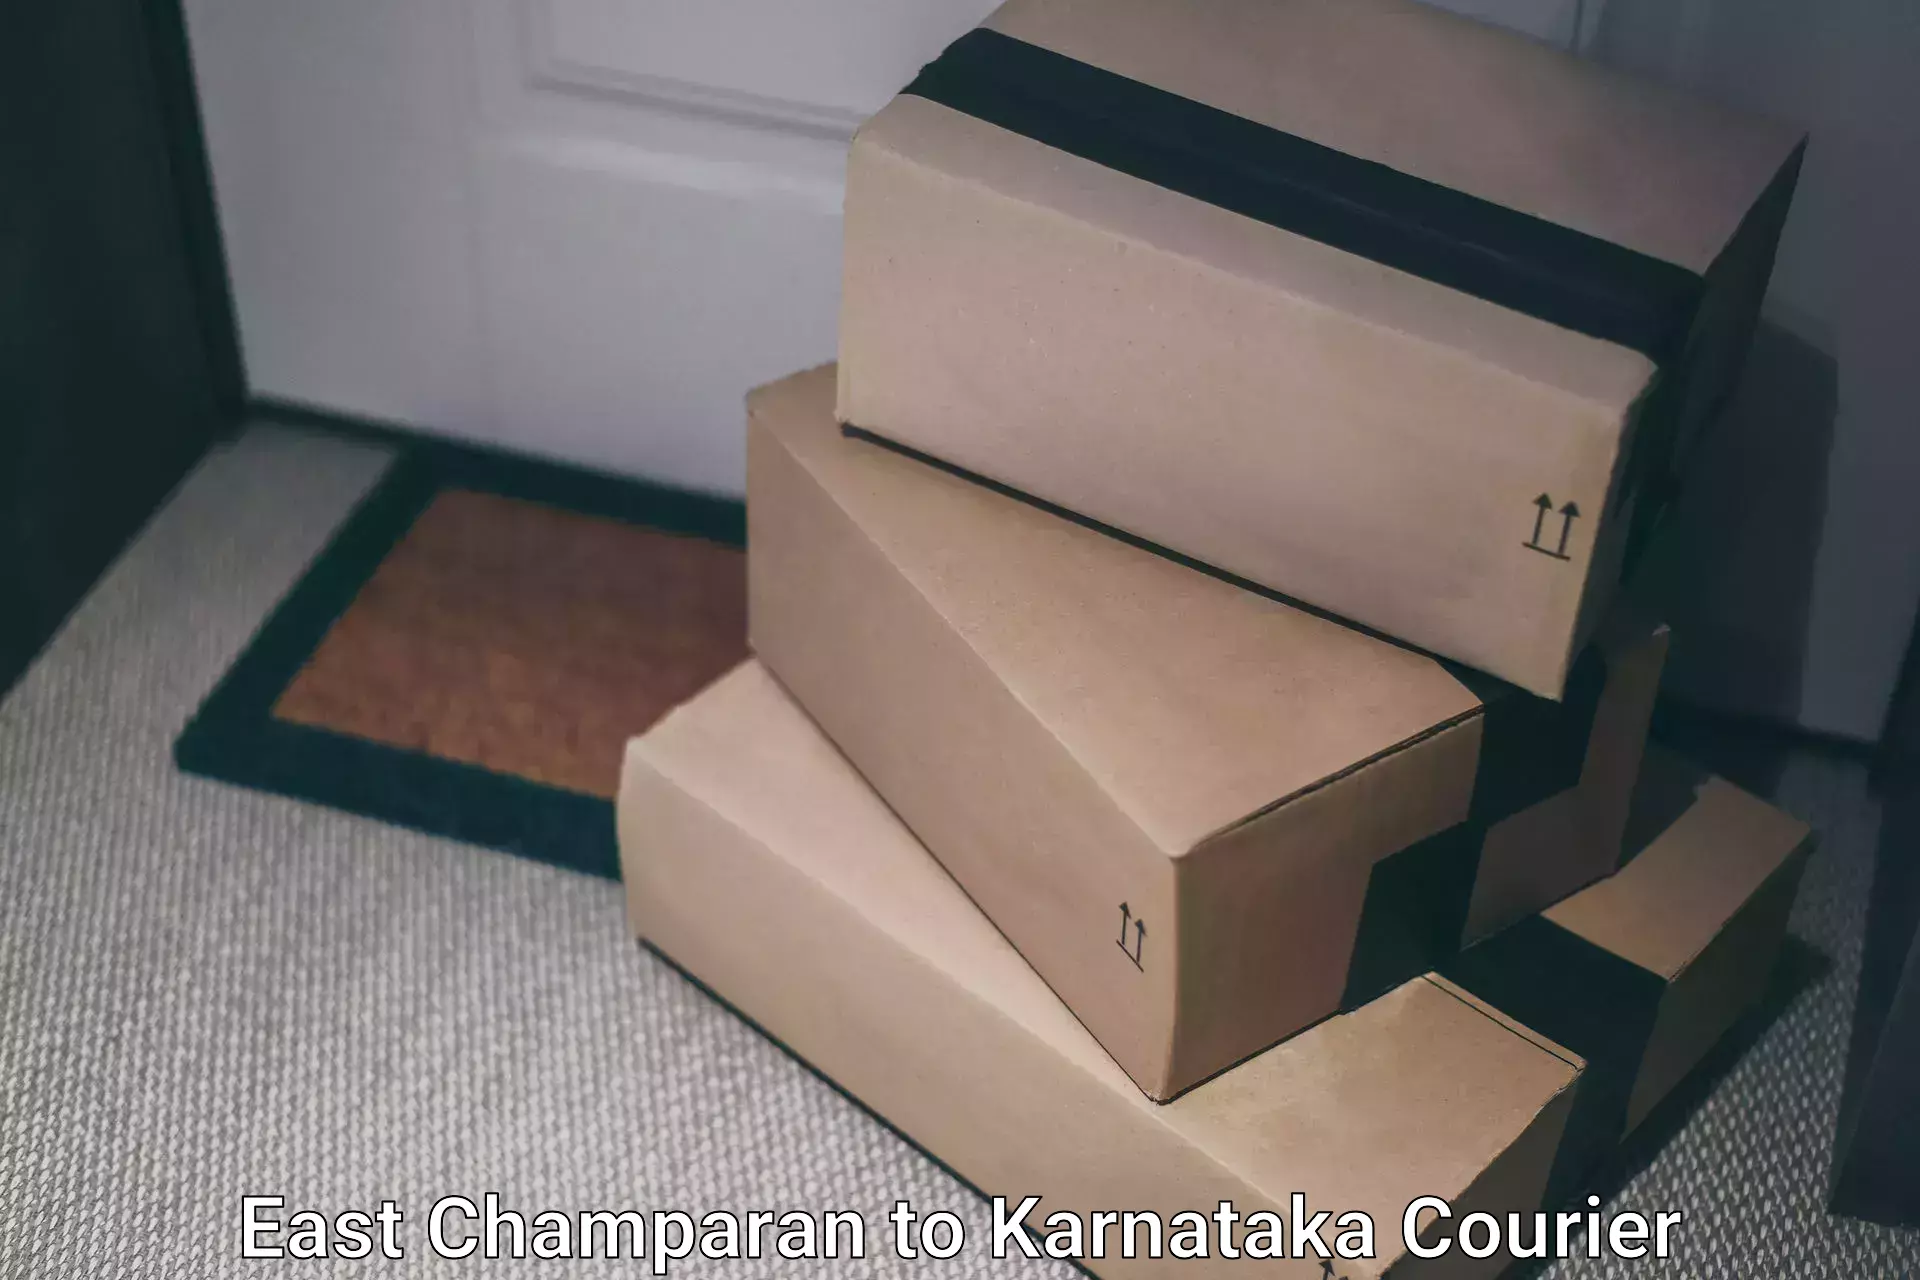 User-friendly delivery service East Champaran to Mandya